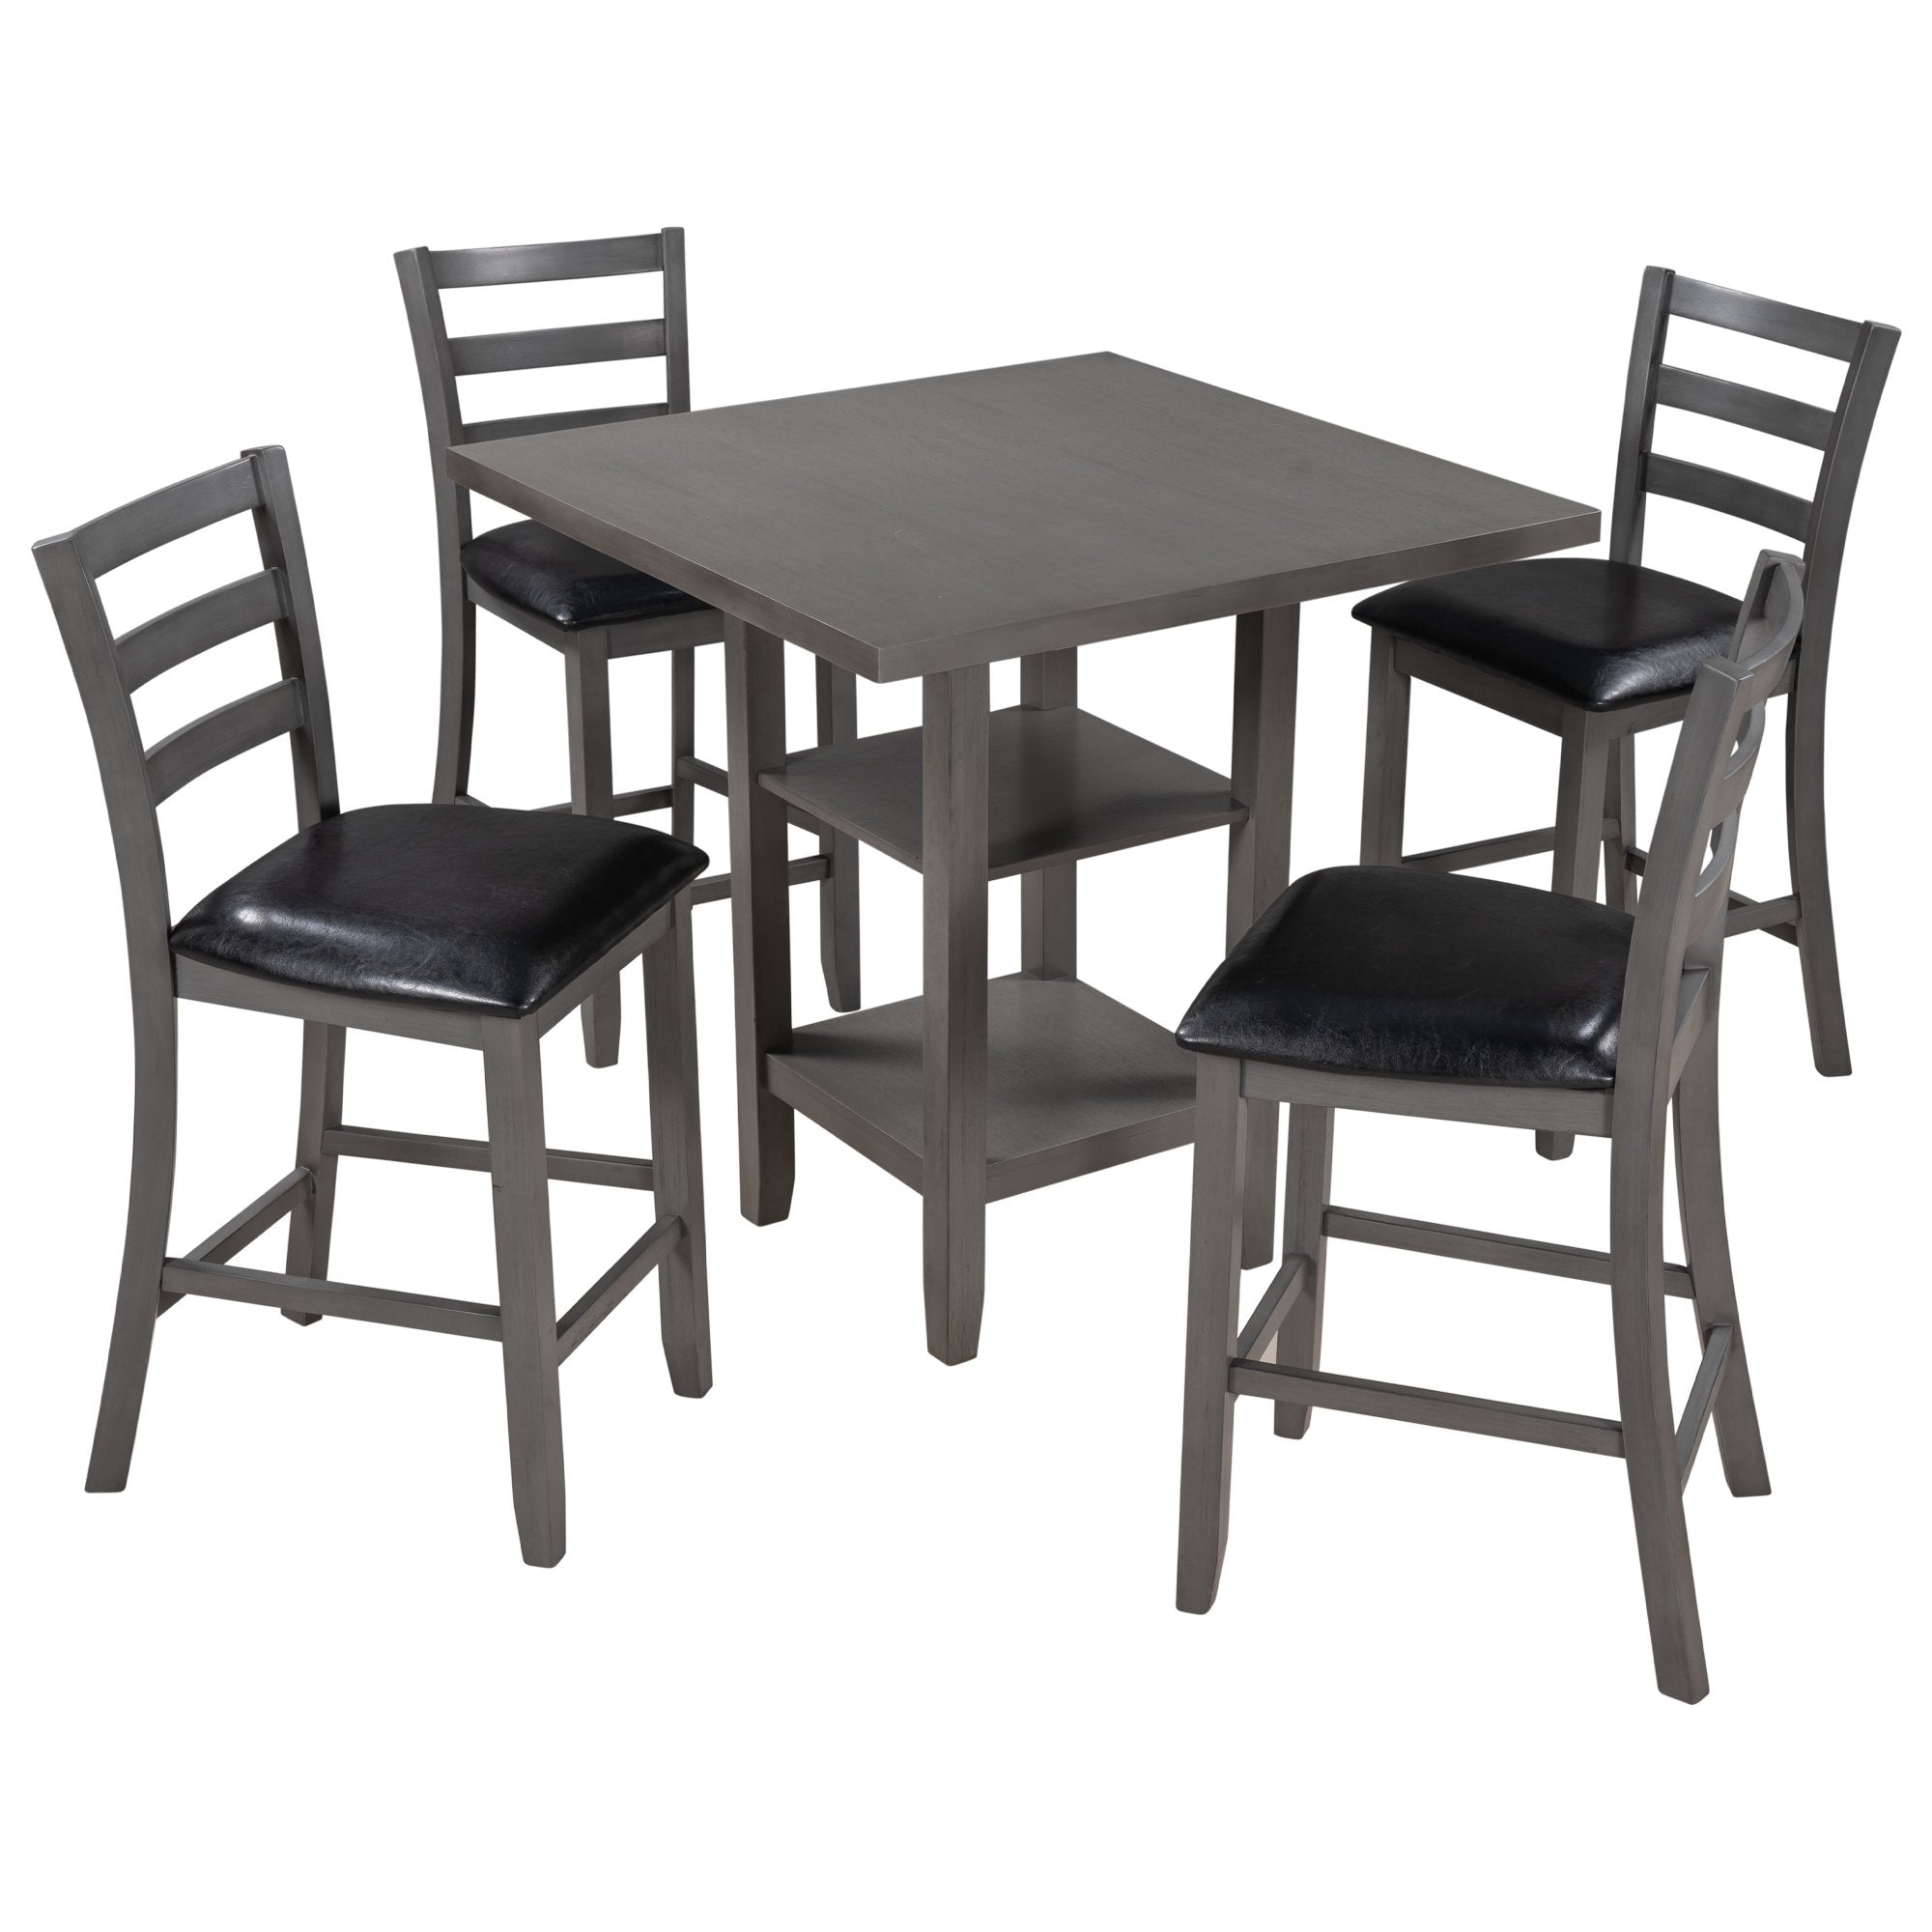 5-Piece Wooden Counter Height Dining Set, Square Dining Table with 2-Tier Storage Shelving and 4 Padded Chairs, Gray